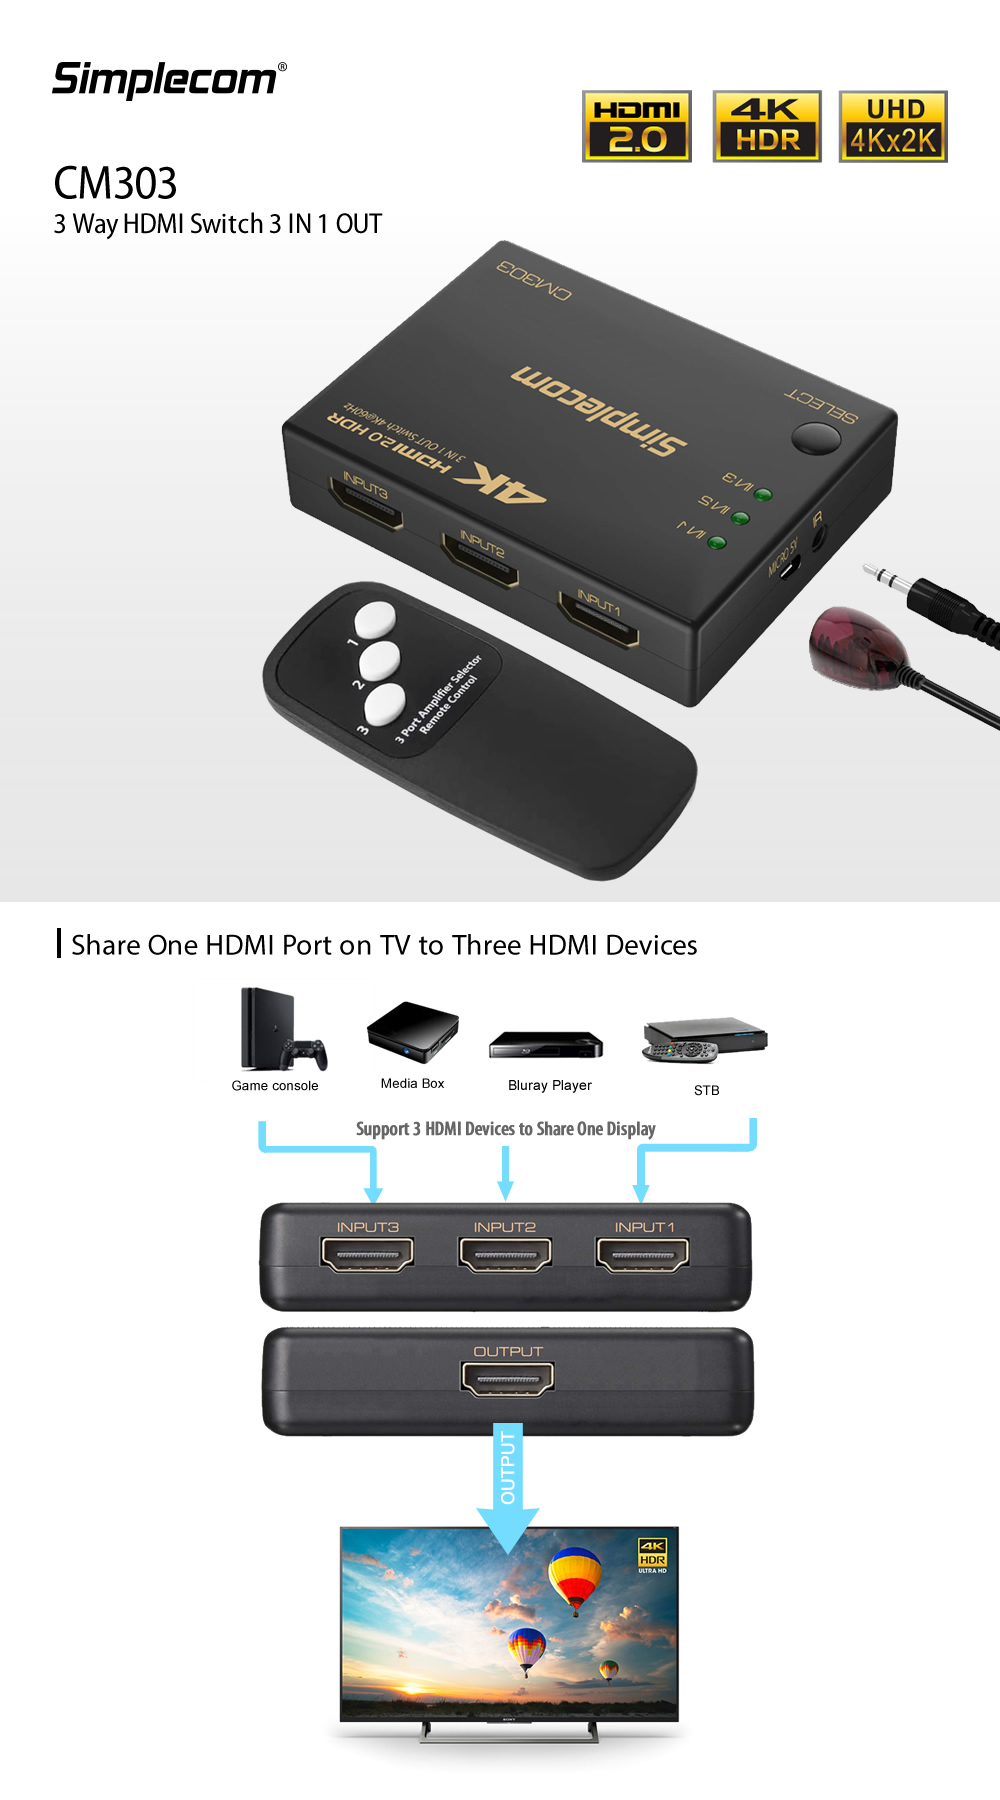 Audio-Cables-Simplecom-CM303-Ultra-HD-3-Way-HDMI-Switch-3-in-1-OUT-Splitter-4K-60Hz-1